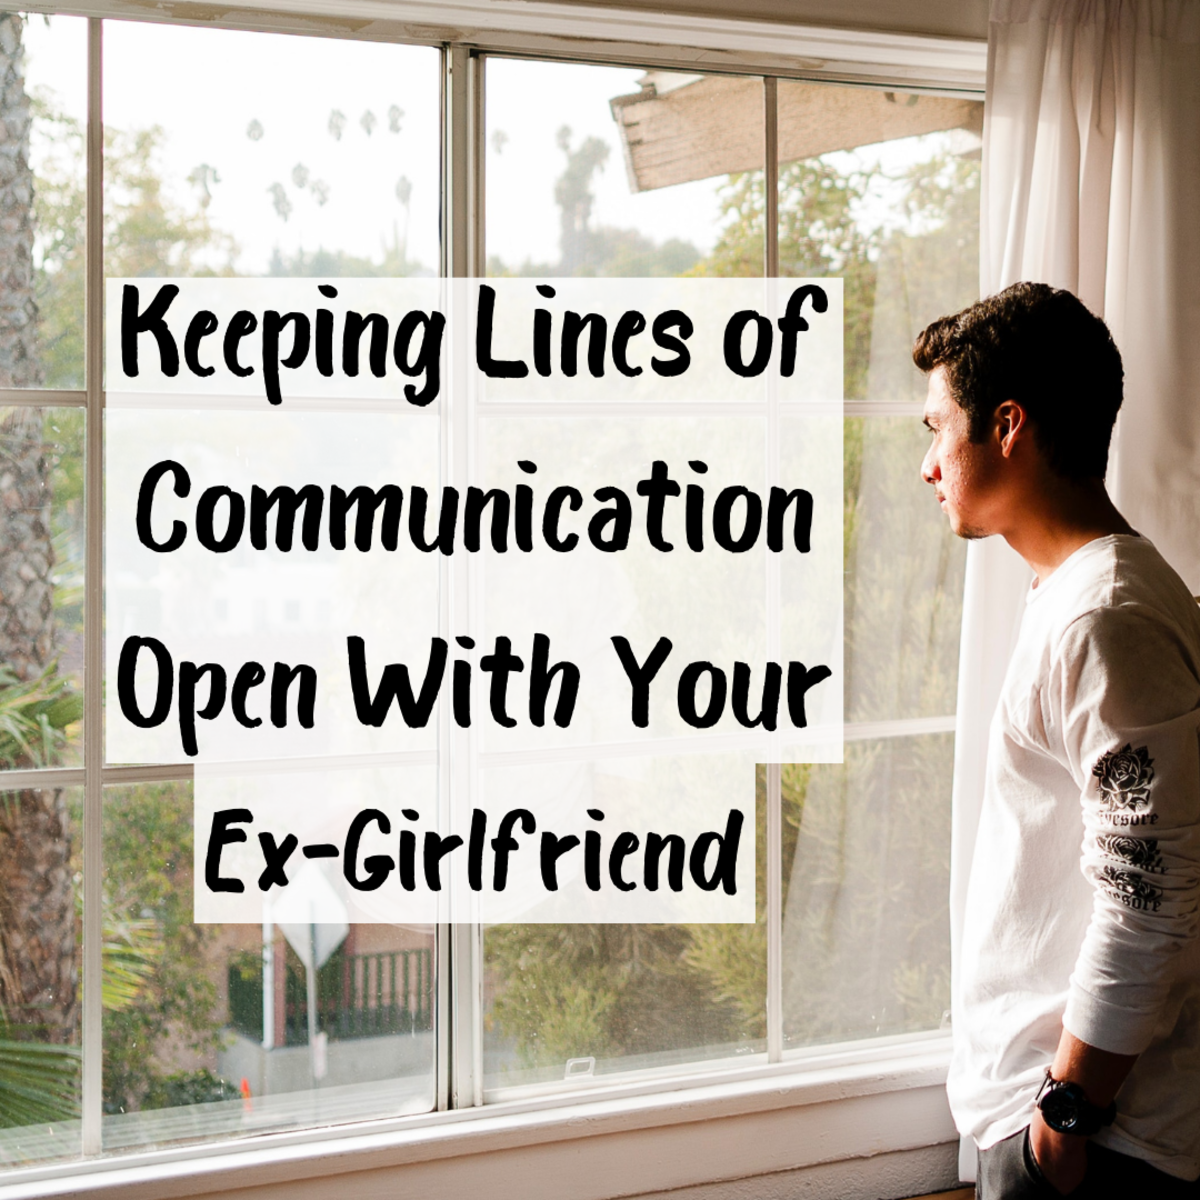 Tips for Restarting Communication With an Ex-Girlfriend